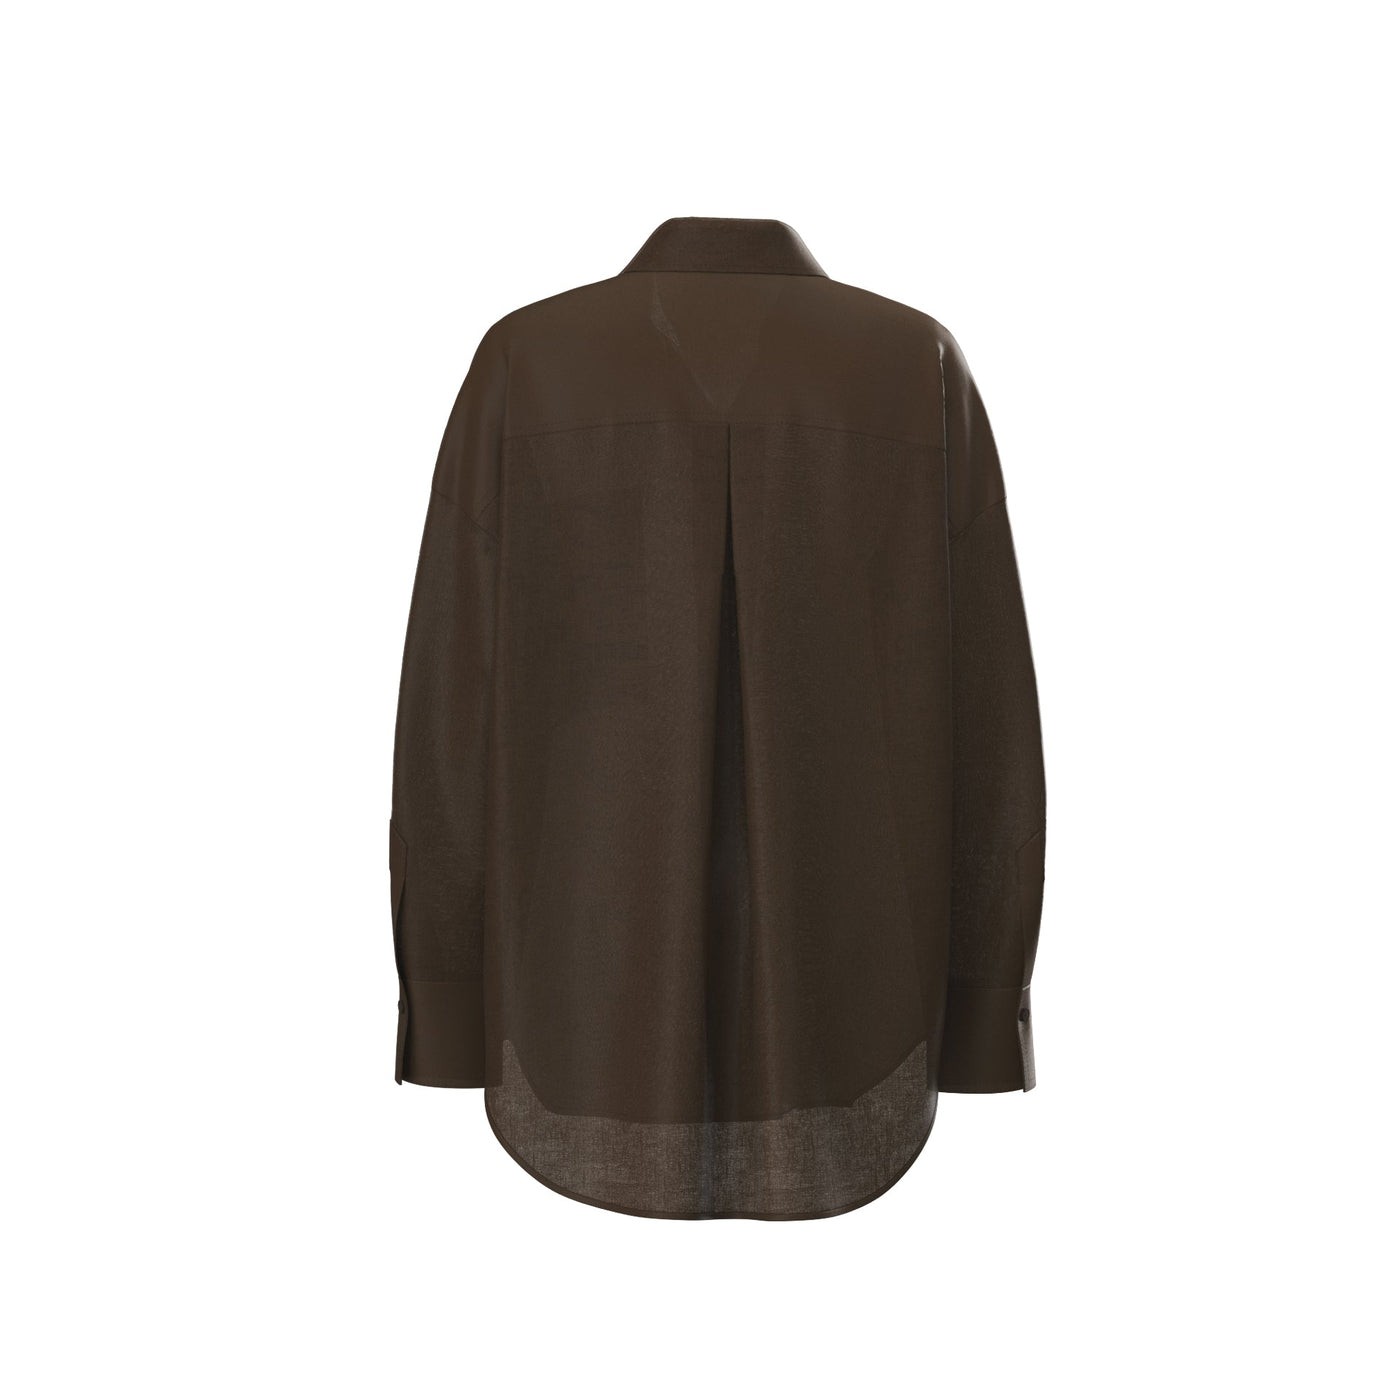 Lilly Pilly Collection Kirra shirt made from 100% Organic linen in Chocolate, as 3D model showing back view